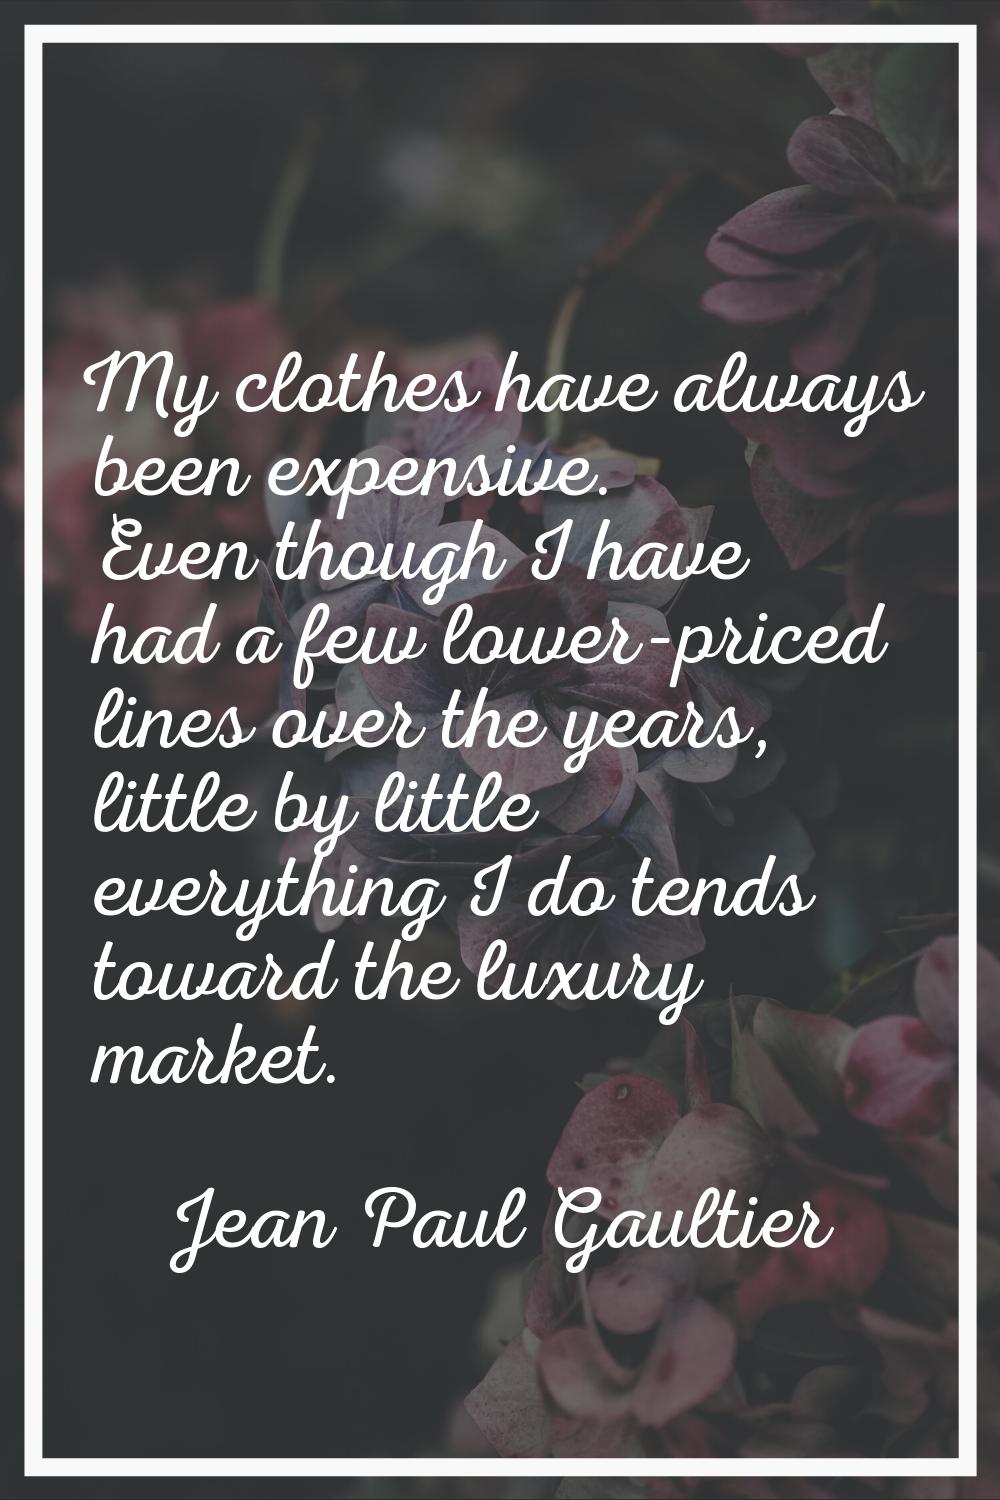 My clothes have always been expensive. Even though I have had a few lower-priced lines over the yea